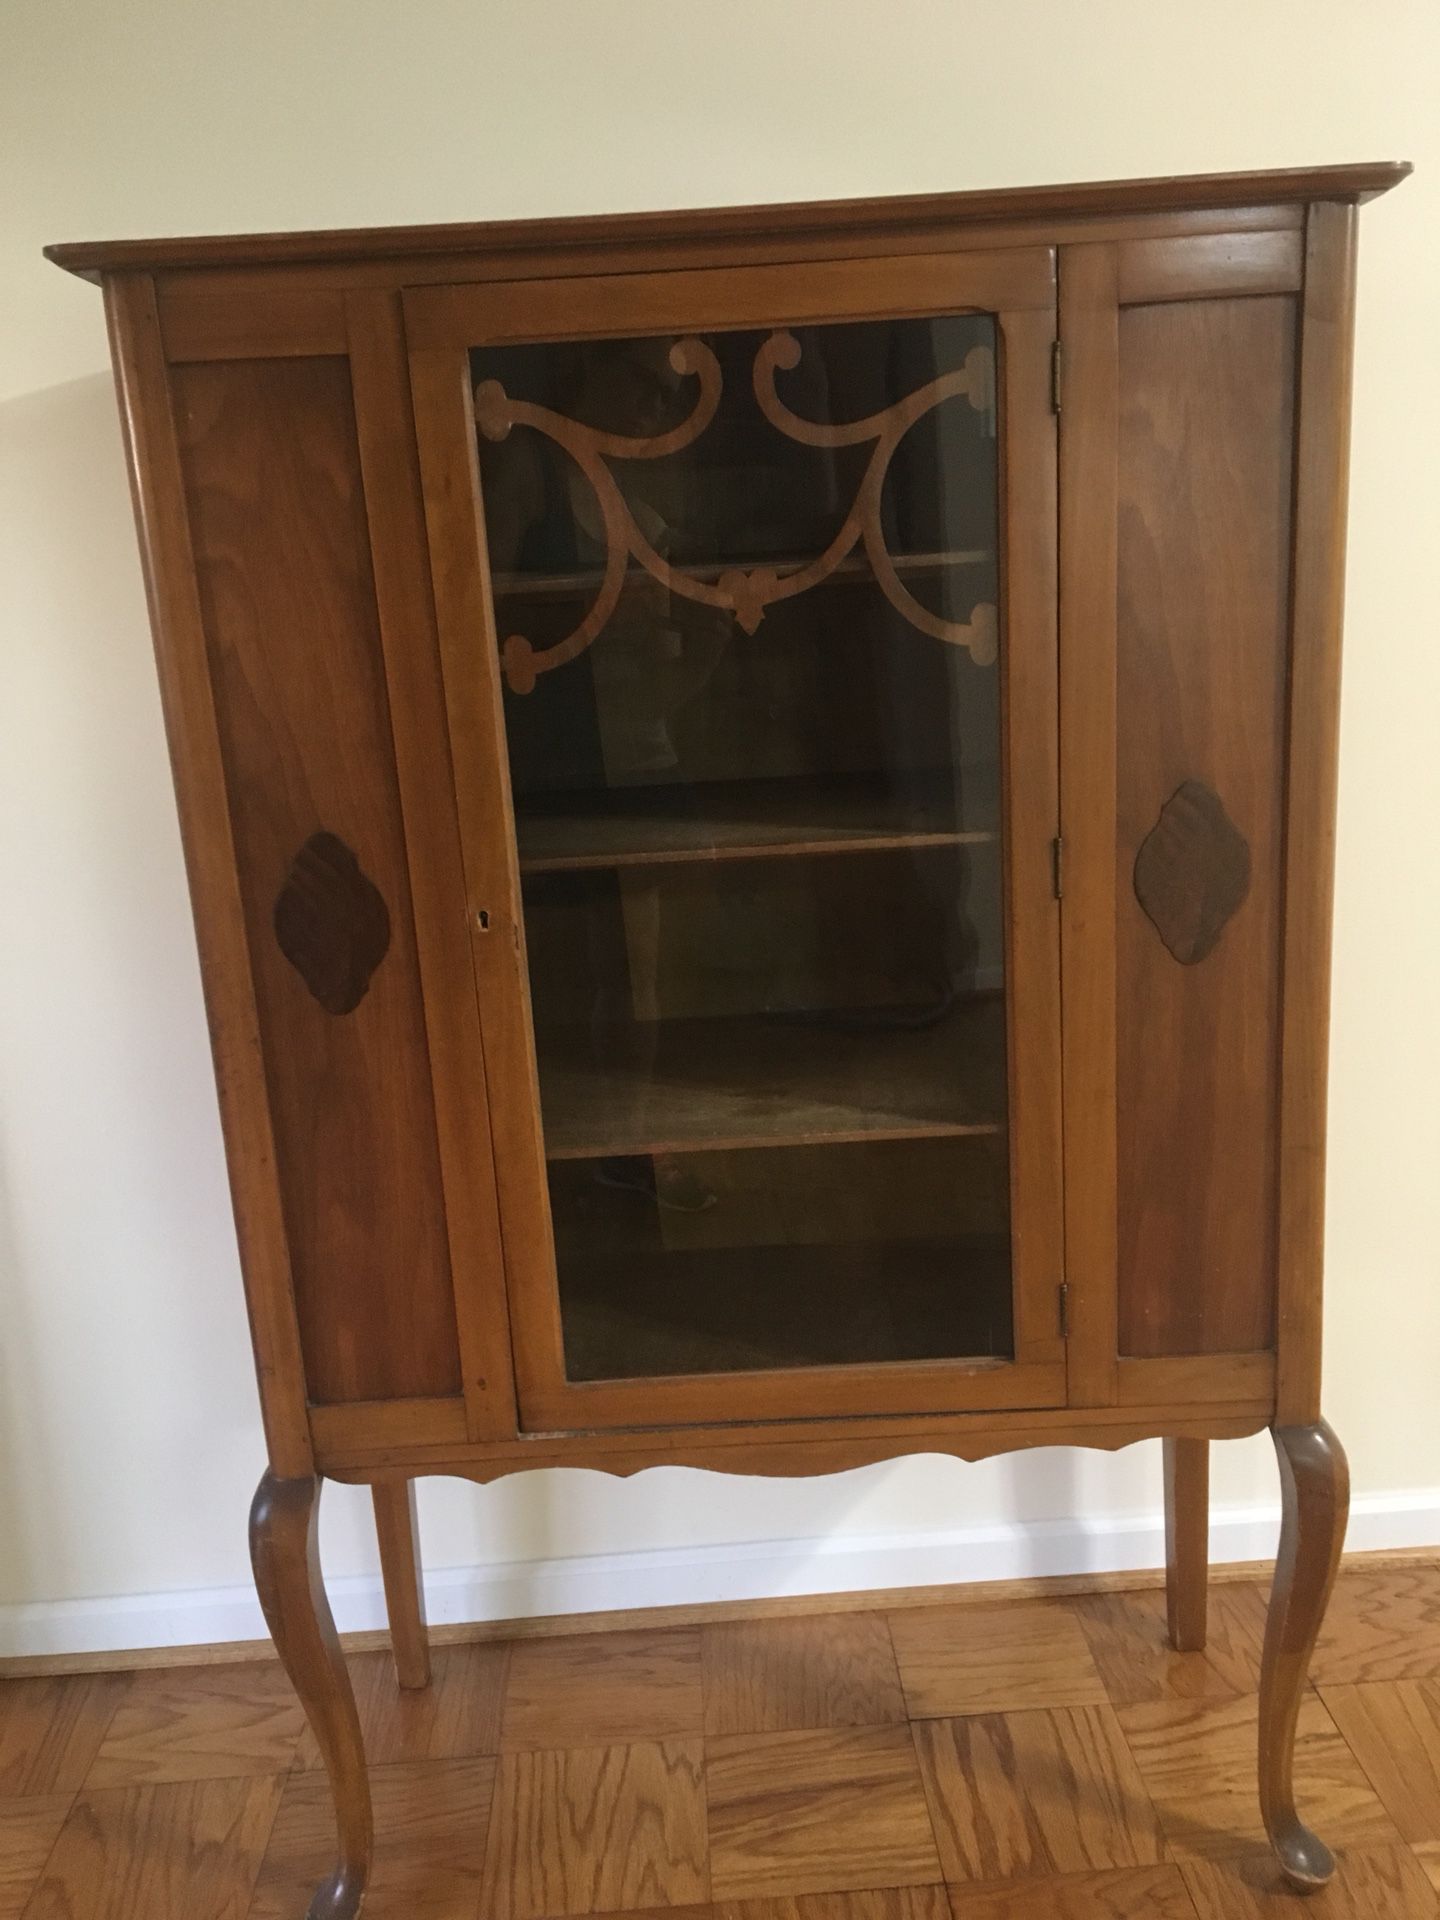 Antique China Cabinet, Excellent condition. Beautiful maple wood. I am moving to smaller space, is why I’m selling it. EXCELLENT price at $225/OBO